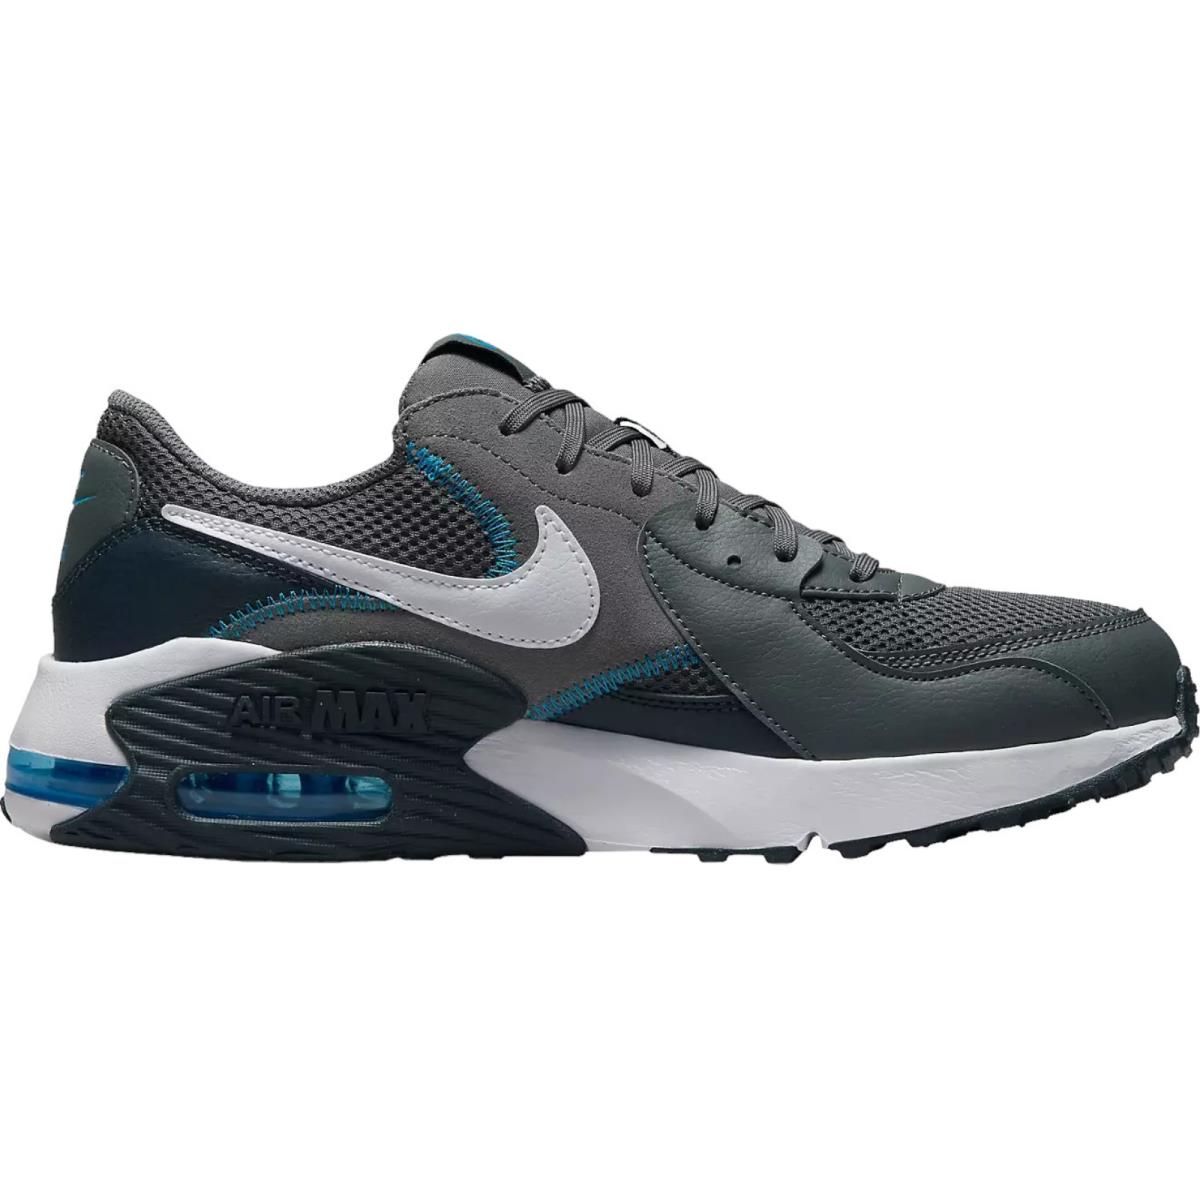 Nike Air Max Excee Men`s Casual Shoes All Colors US Sizes 7-14 Iron Grey/White/Photo Blue/Dark Obsidian